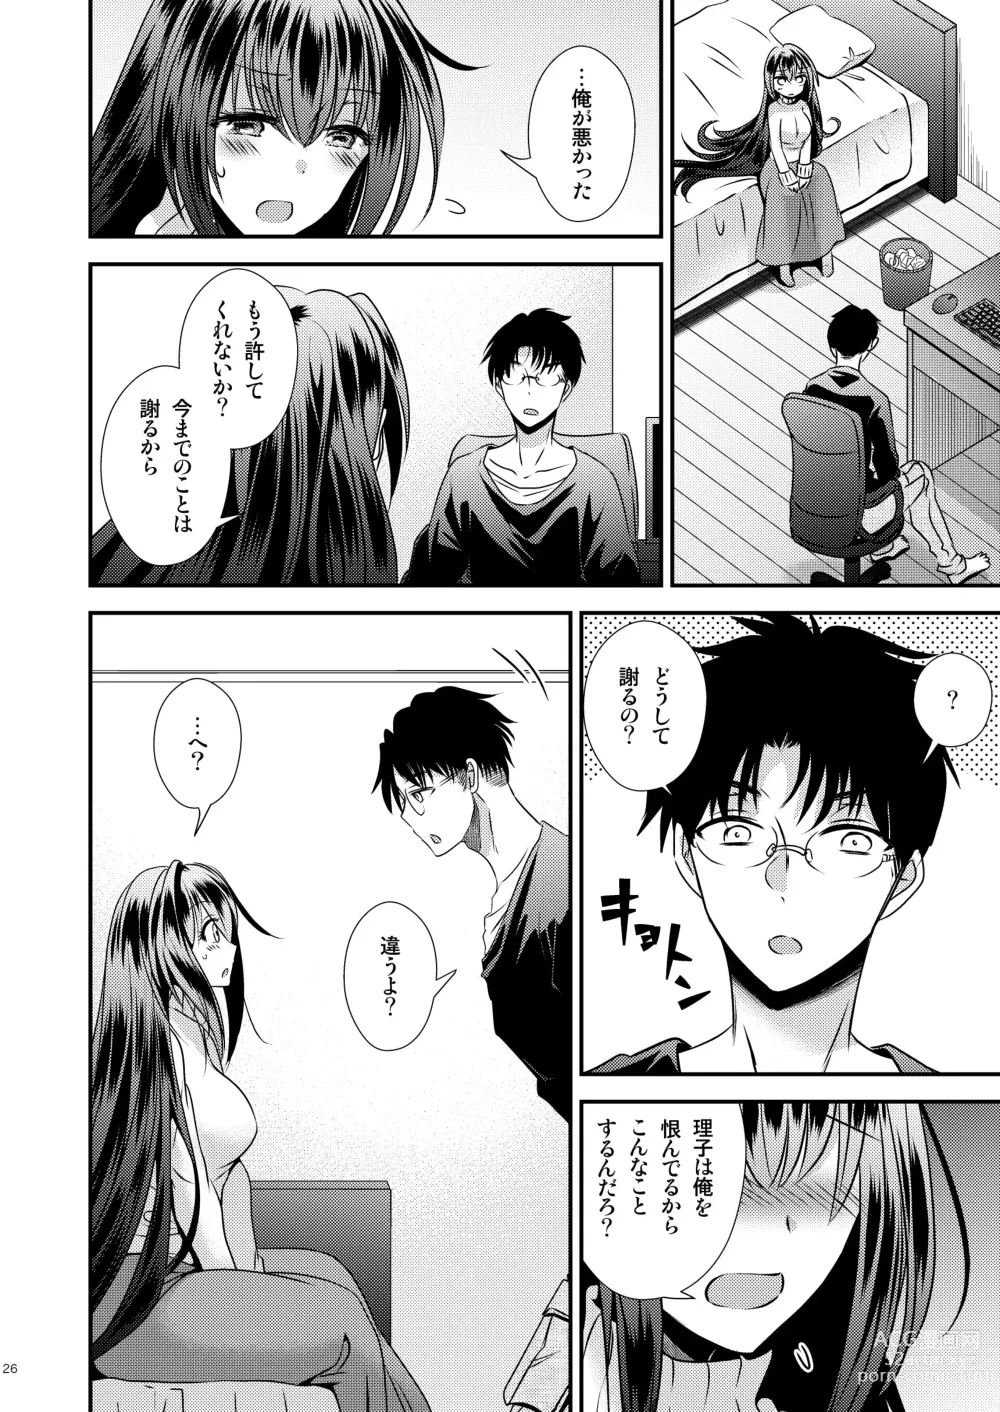 Page 26 of doujinshi 性欲処理に使っていた妹と入れ替わった兄